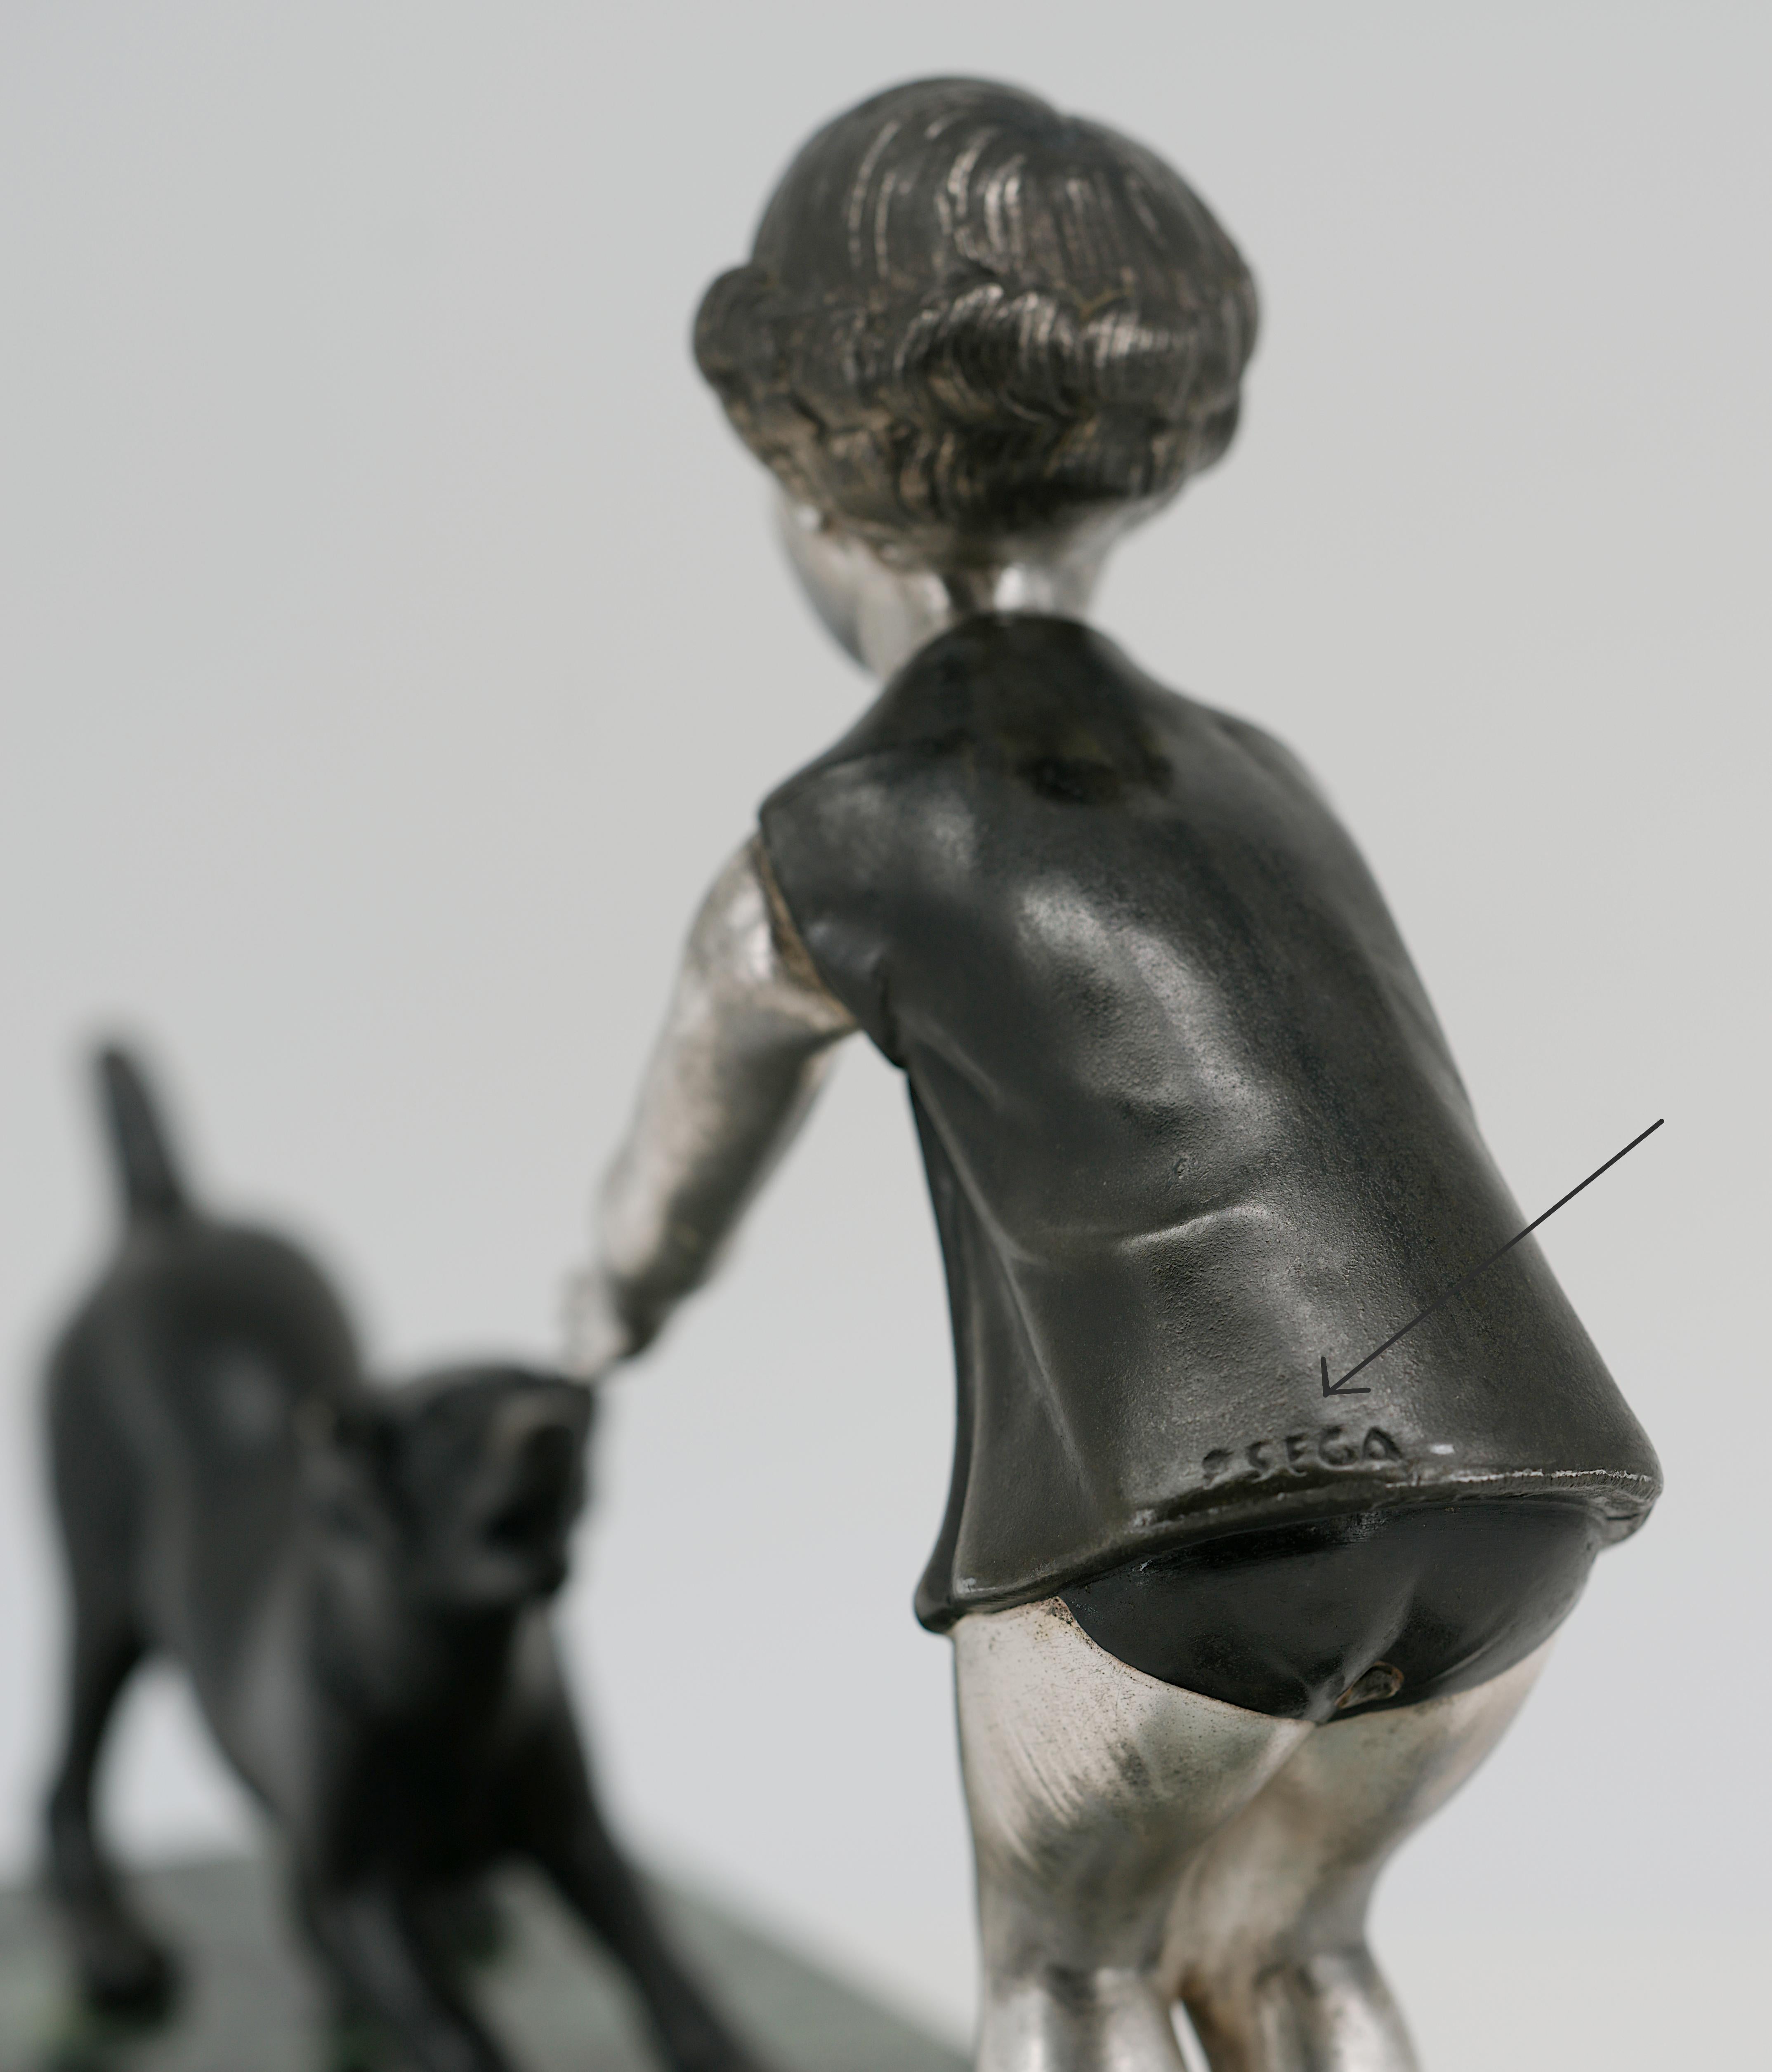 French Art Deco Young Girl & Greyhound Sculpture by P.Sega, 1930s 3